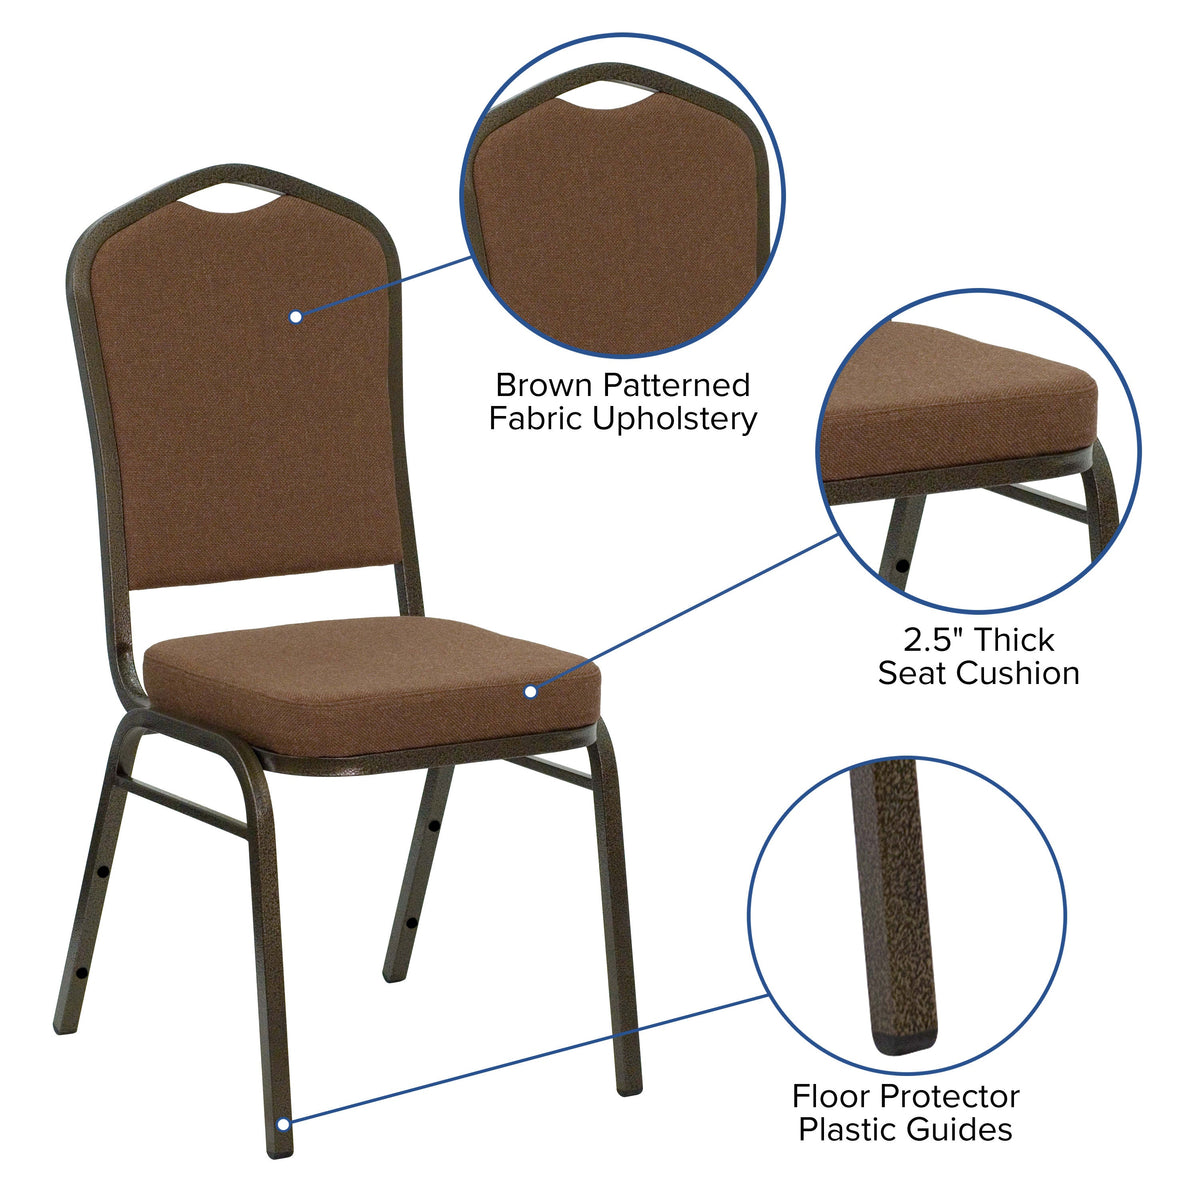 Coffee Fabric/Gold Vein Frame |#| Crown Back Stacking Banquet Chair in Coffee Fabric - Gold Vein Frame